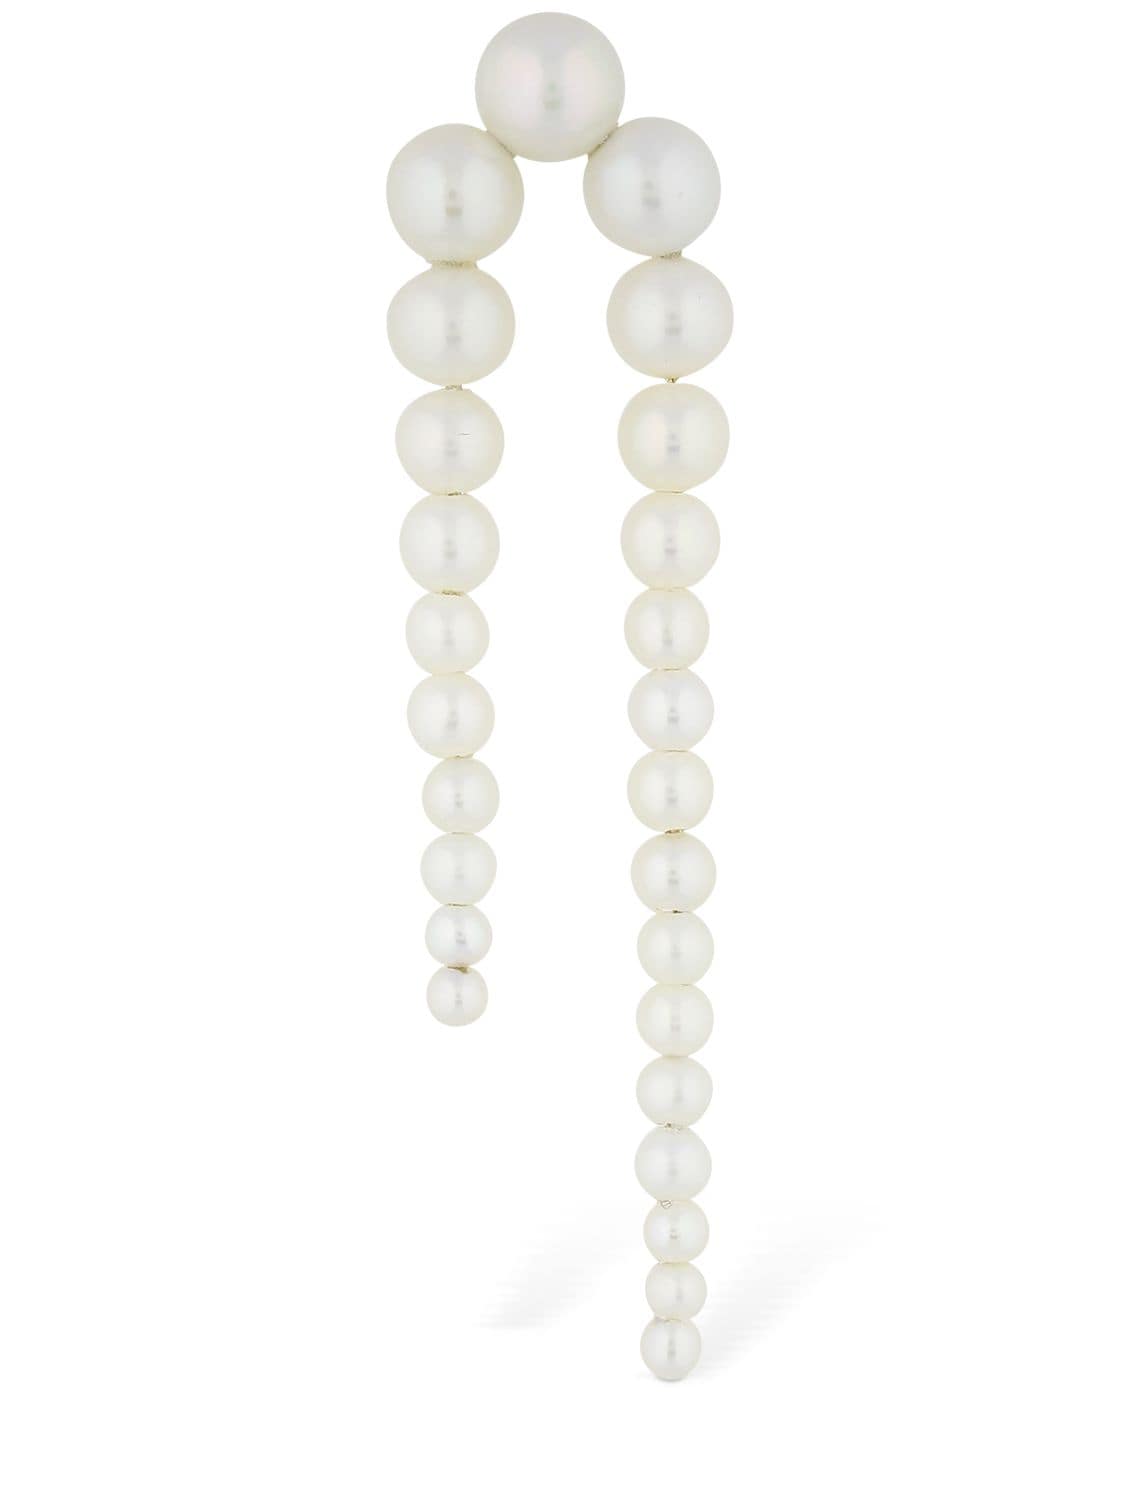 Image of Perle Nuit Rx Mono Earring